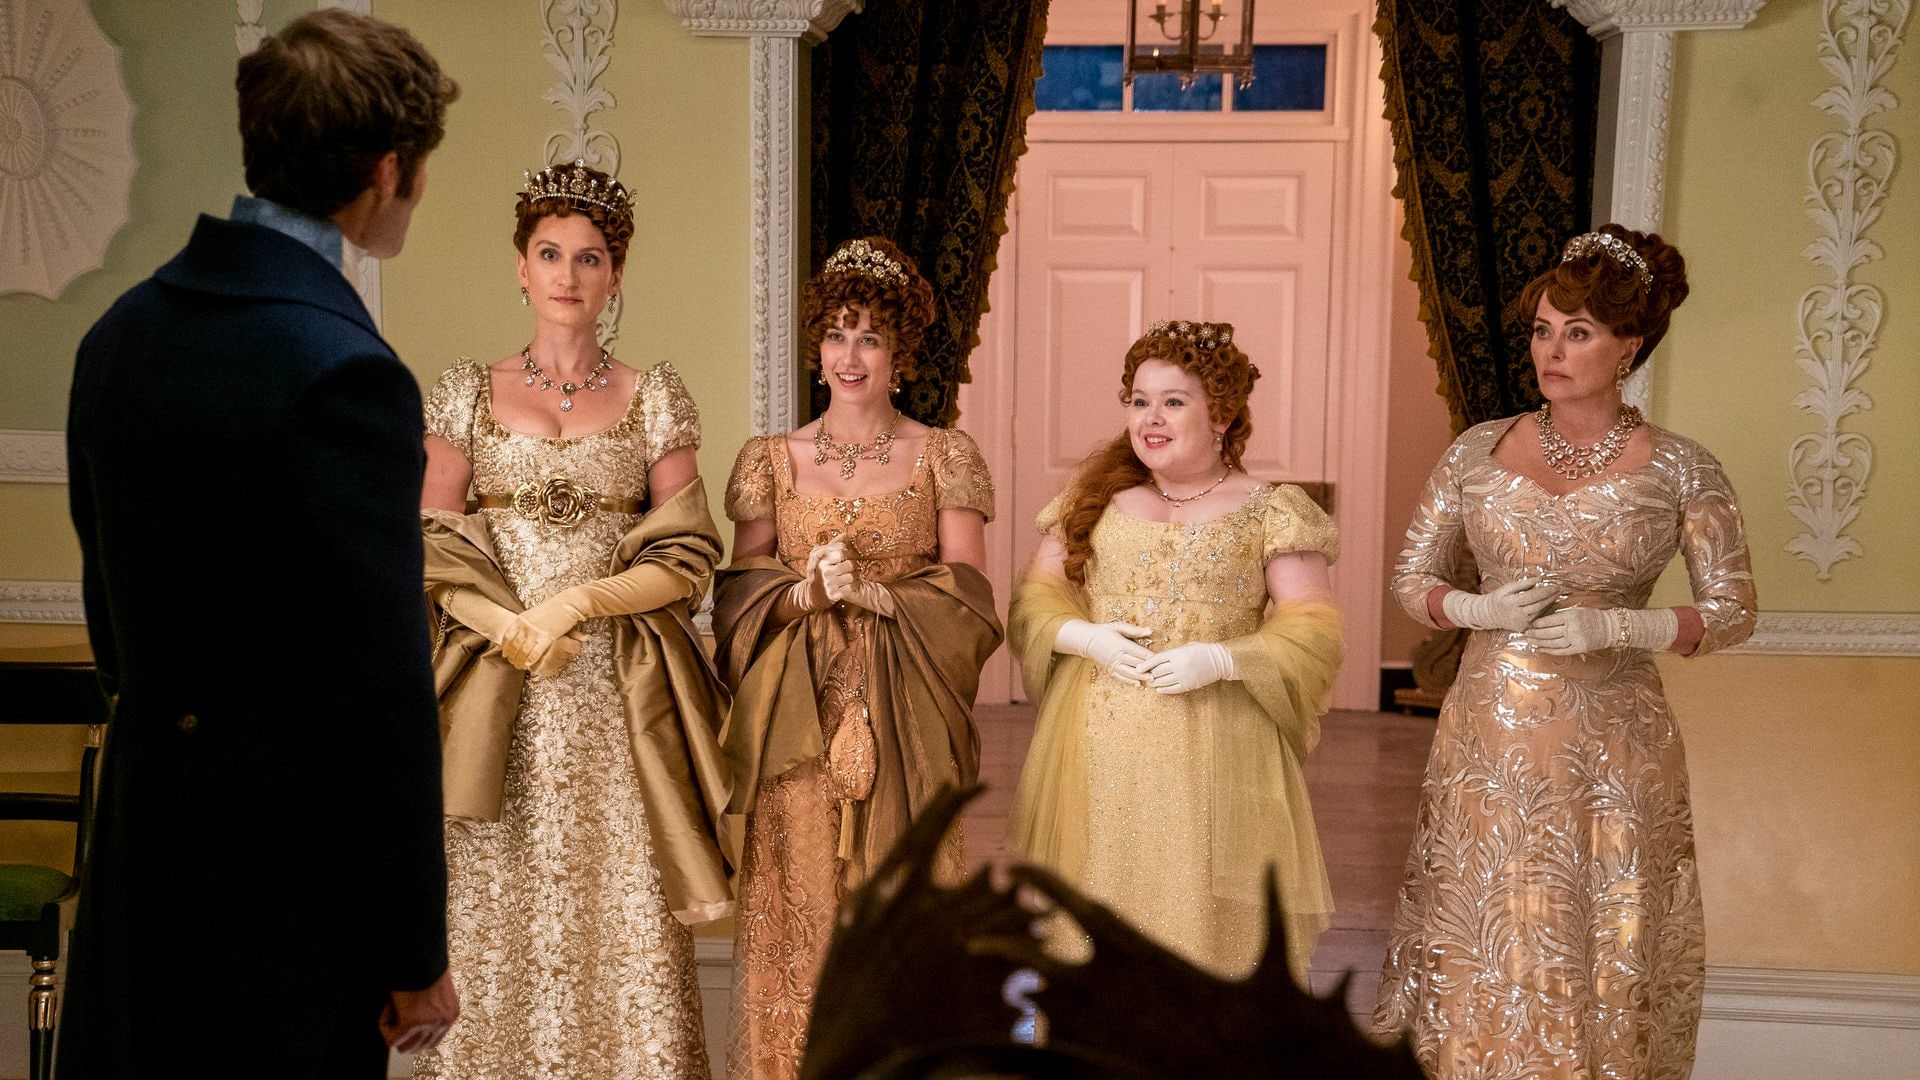 Rupert Young as Lord Jack, Bessie Carter as Prudence, Harriet Cains as Philipa, Nicola Coughlan as Penelope , Polly Walker as Lady Portia Featherington